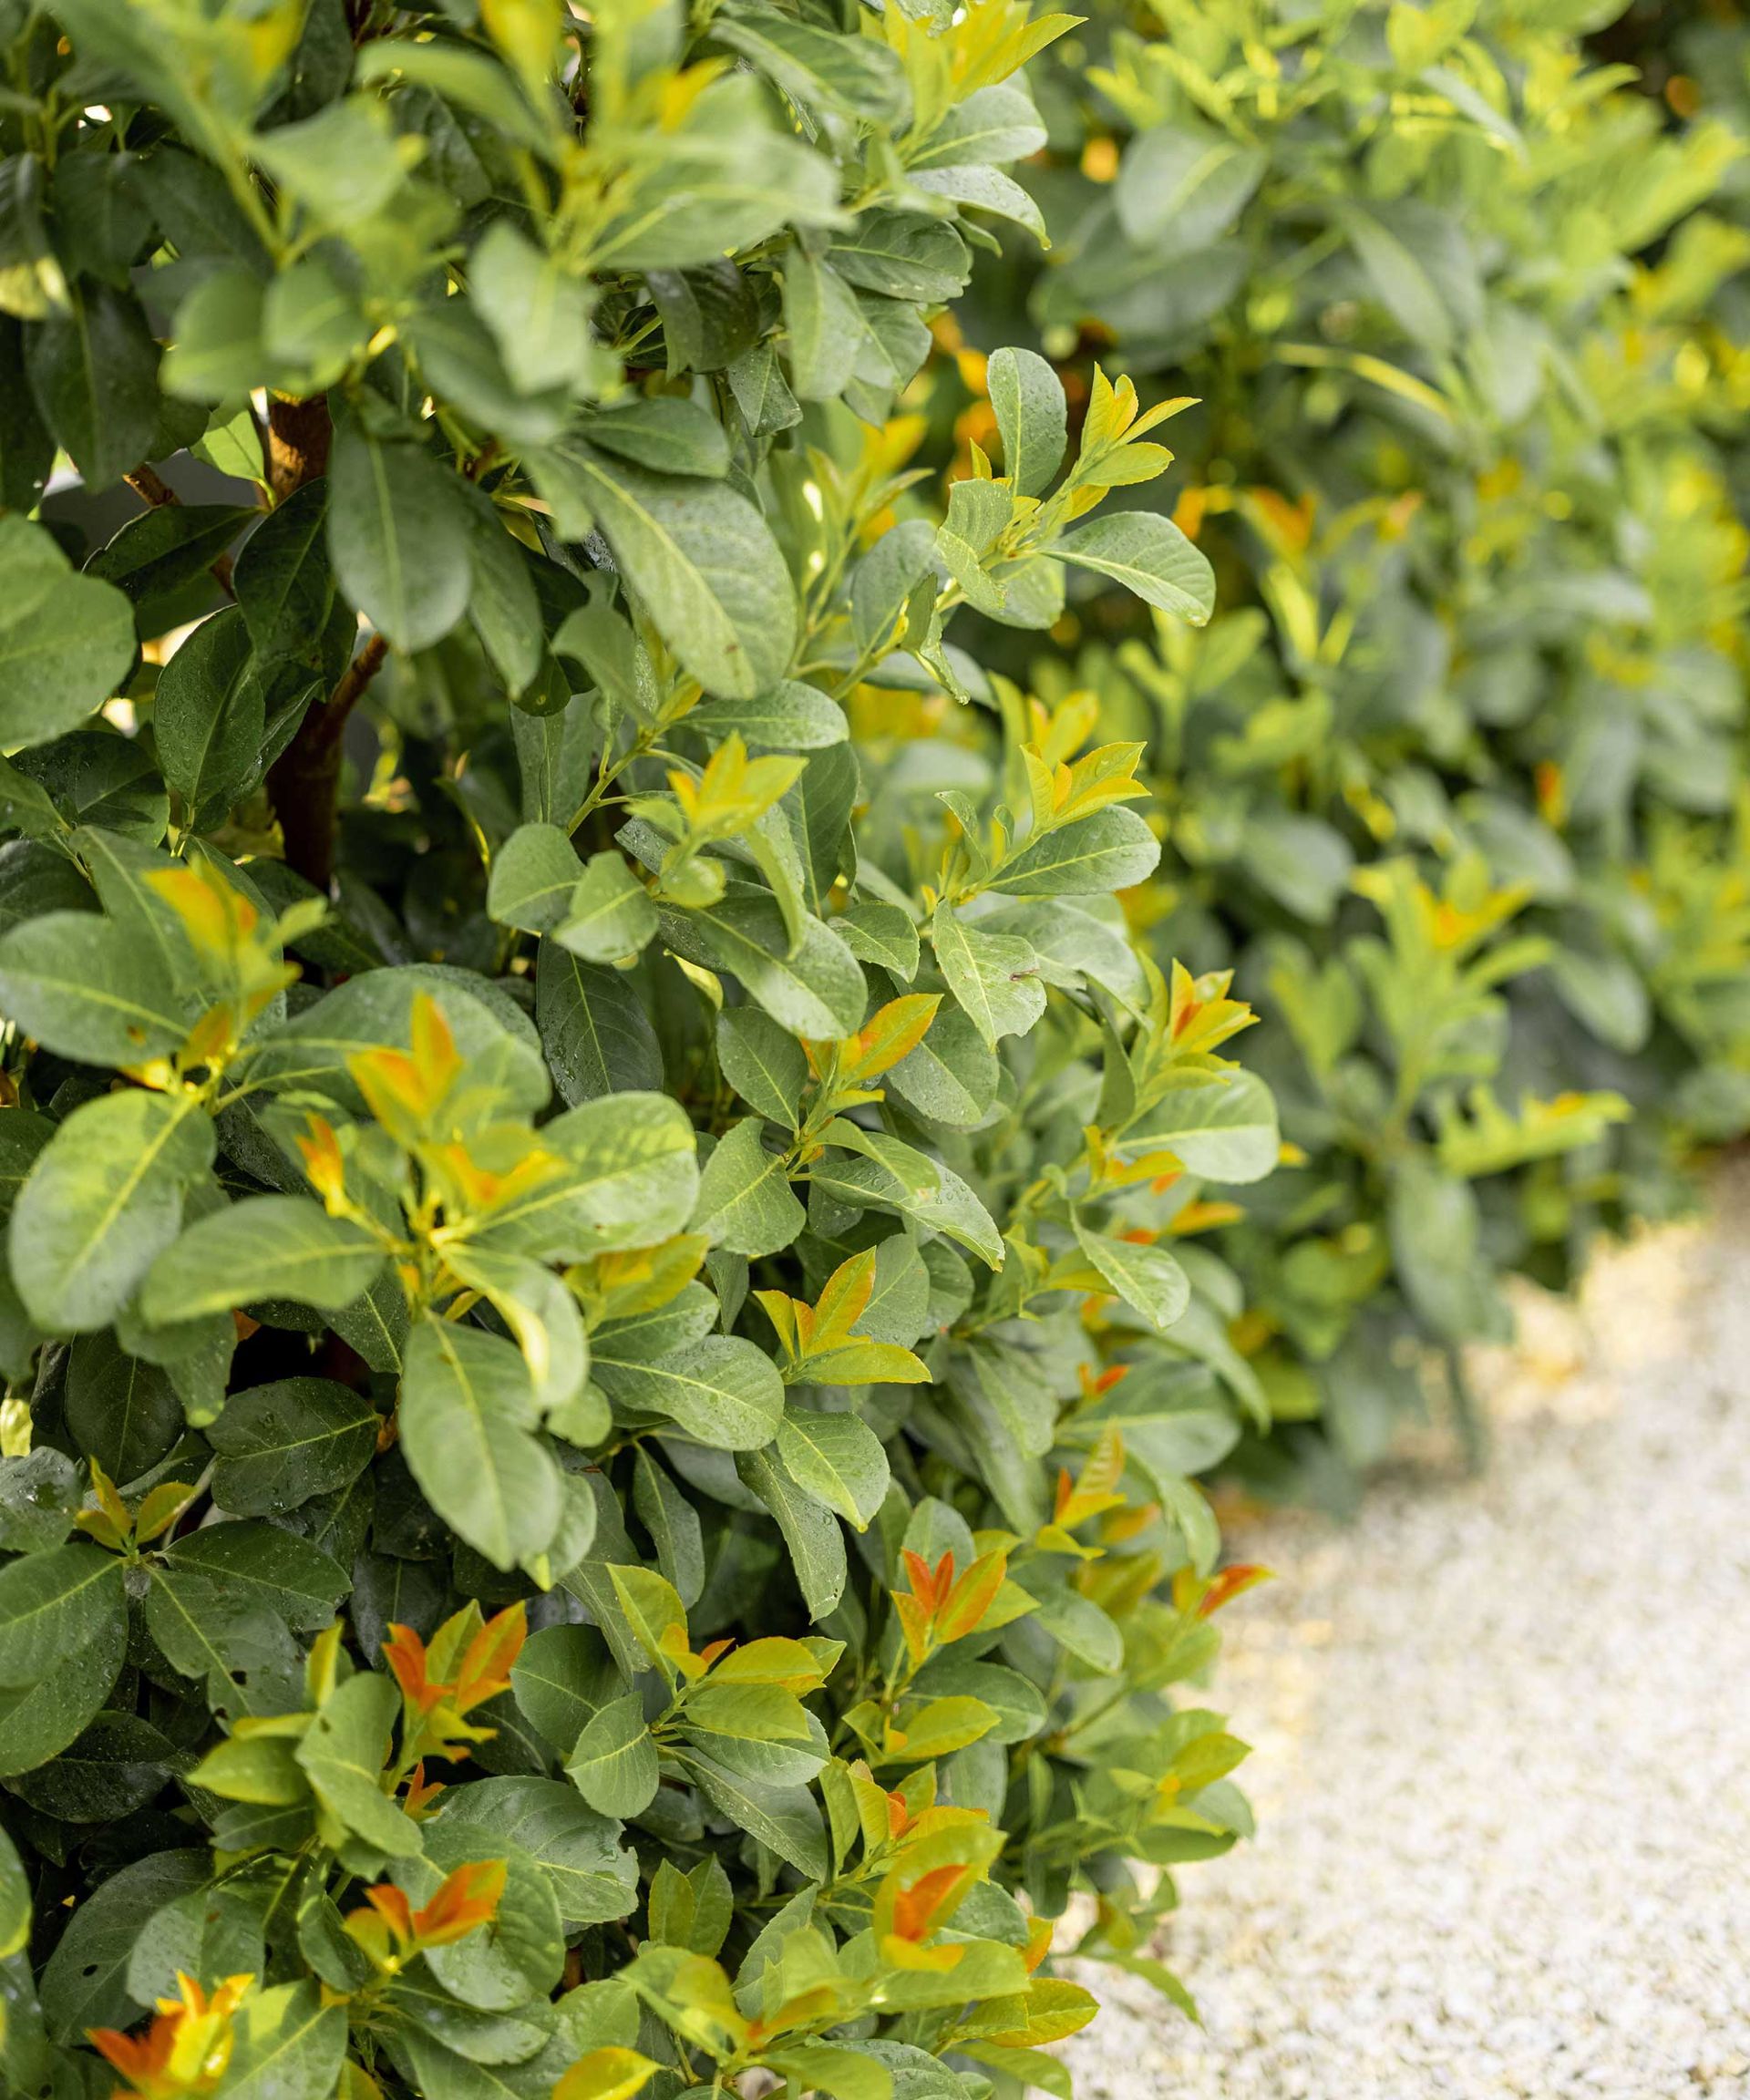 Best front yard hedges for privacy – 10 leafy choices to screen your ...